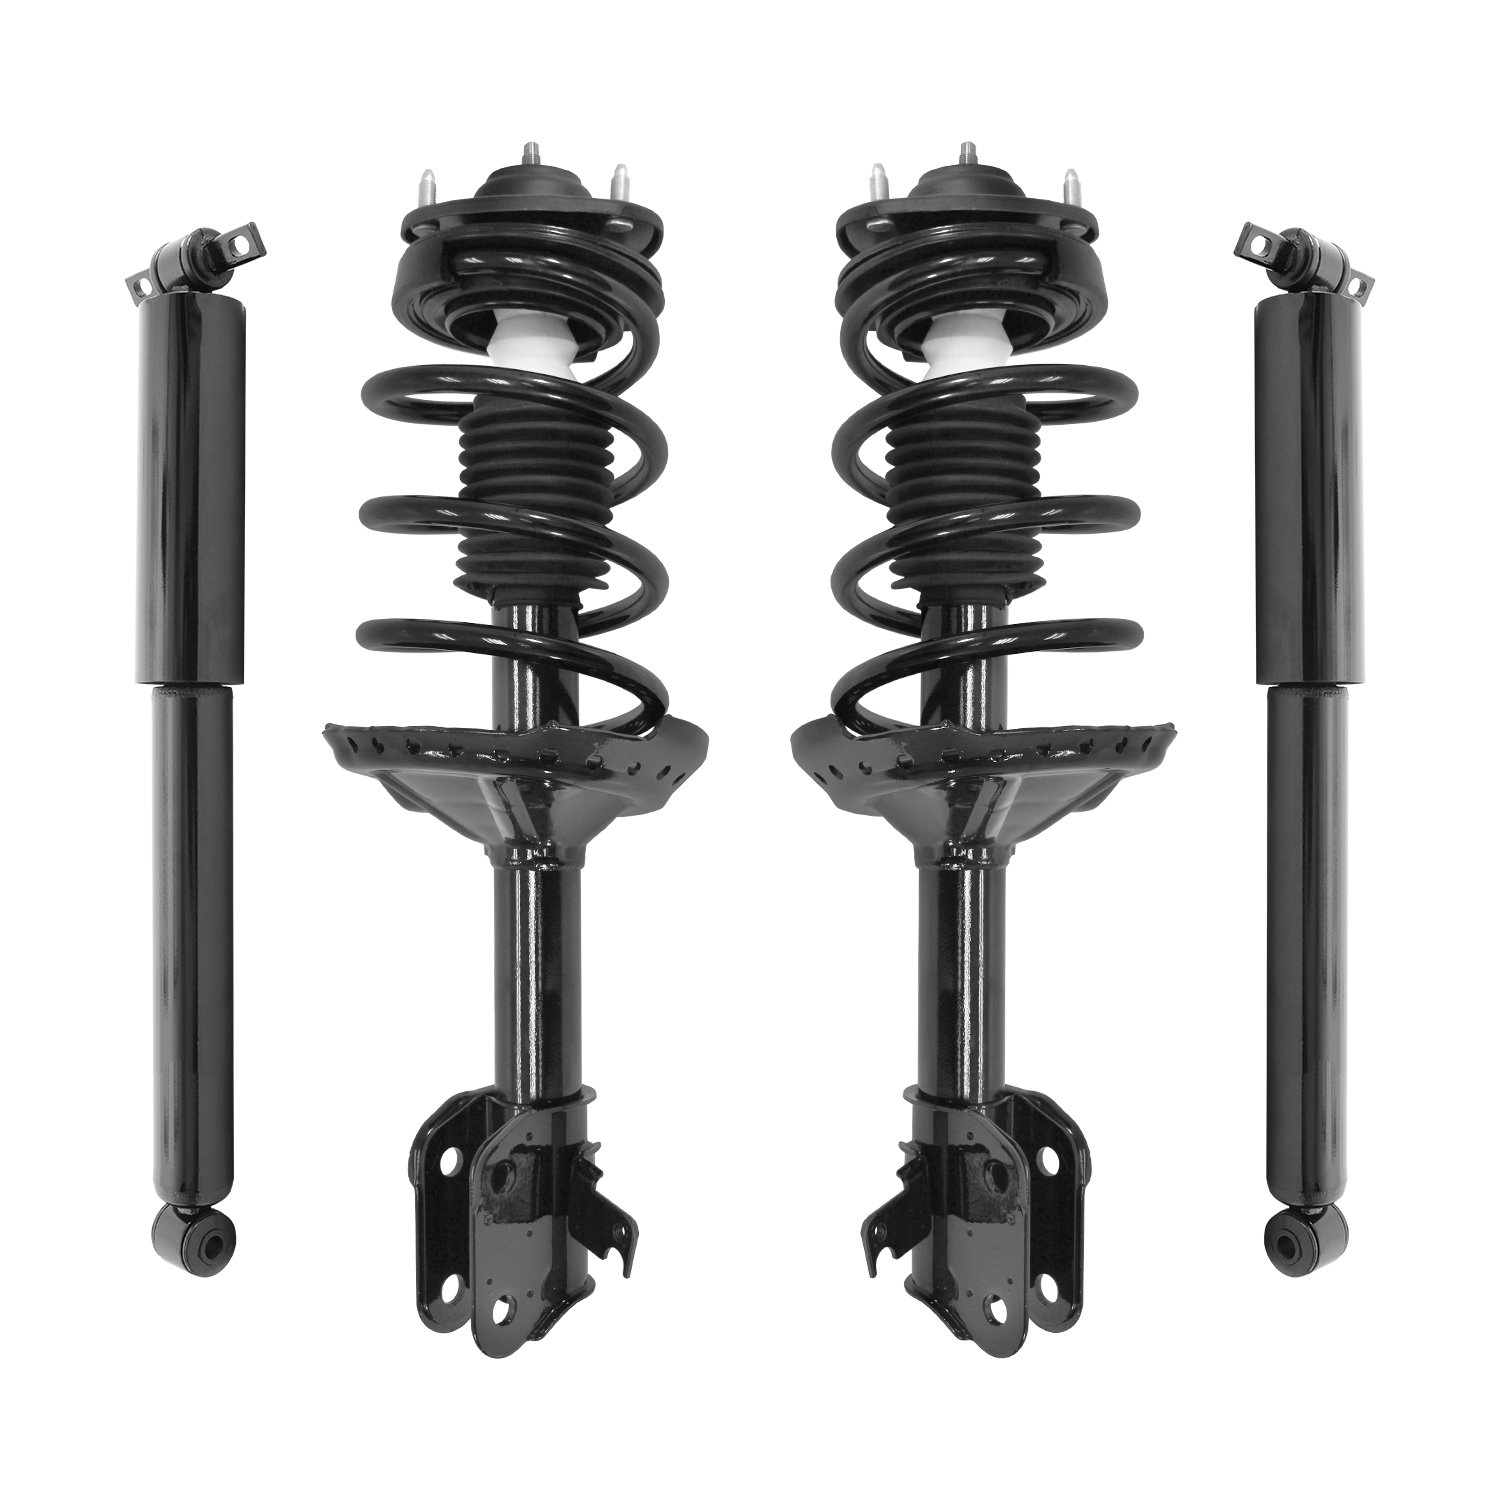 4-11903-250050-001 Front & Rear Suspension Strut & Coil Spring Assembly Fits Select Honda Odyssey